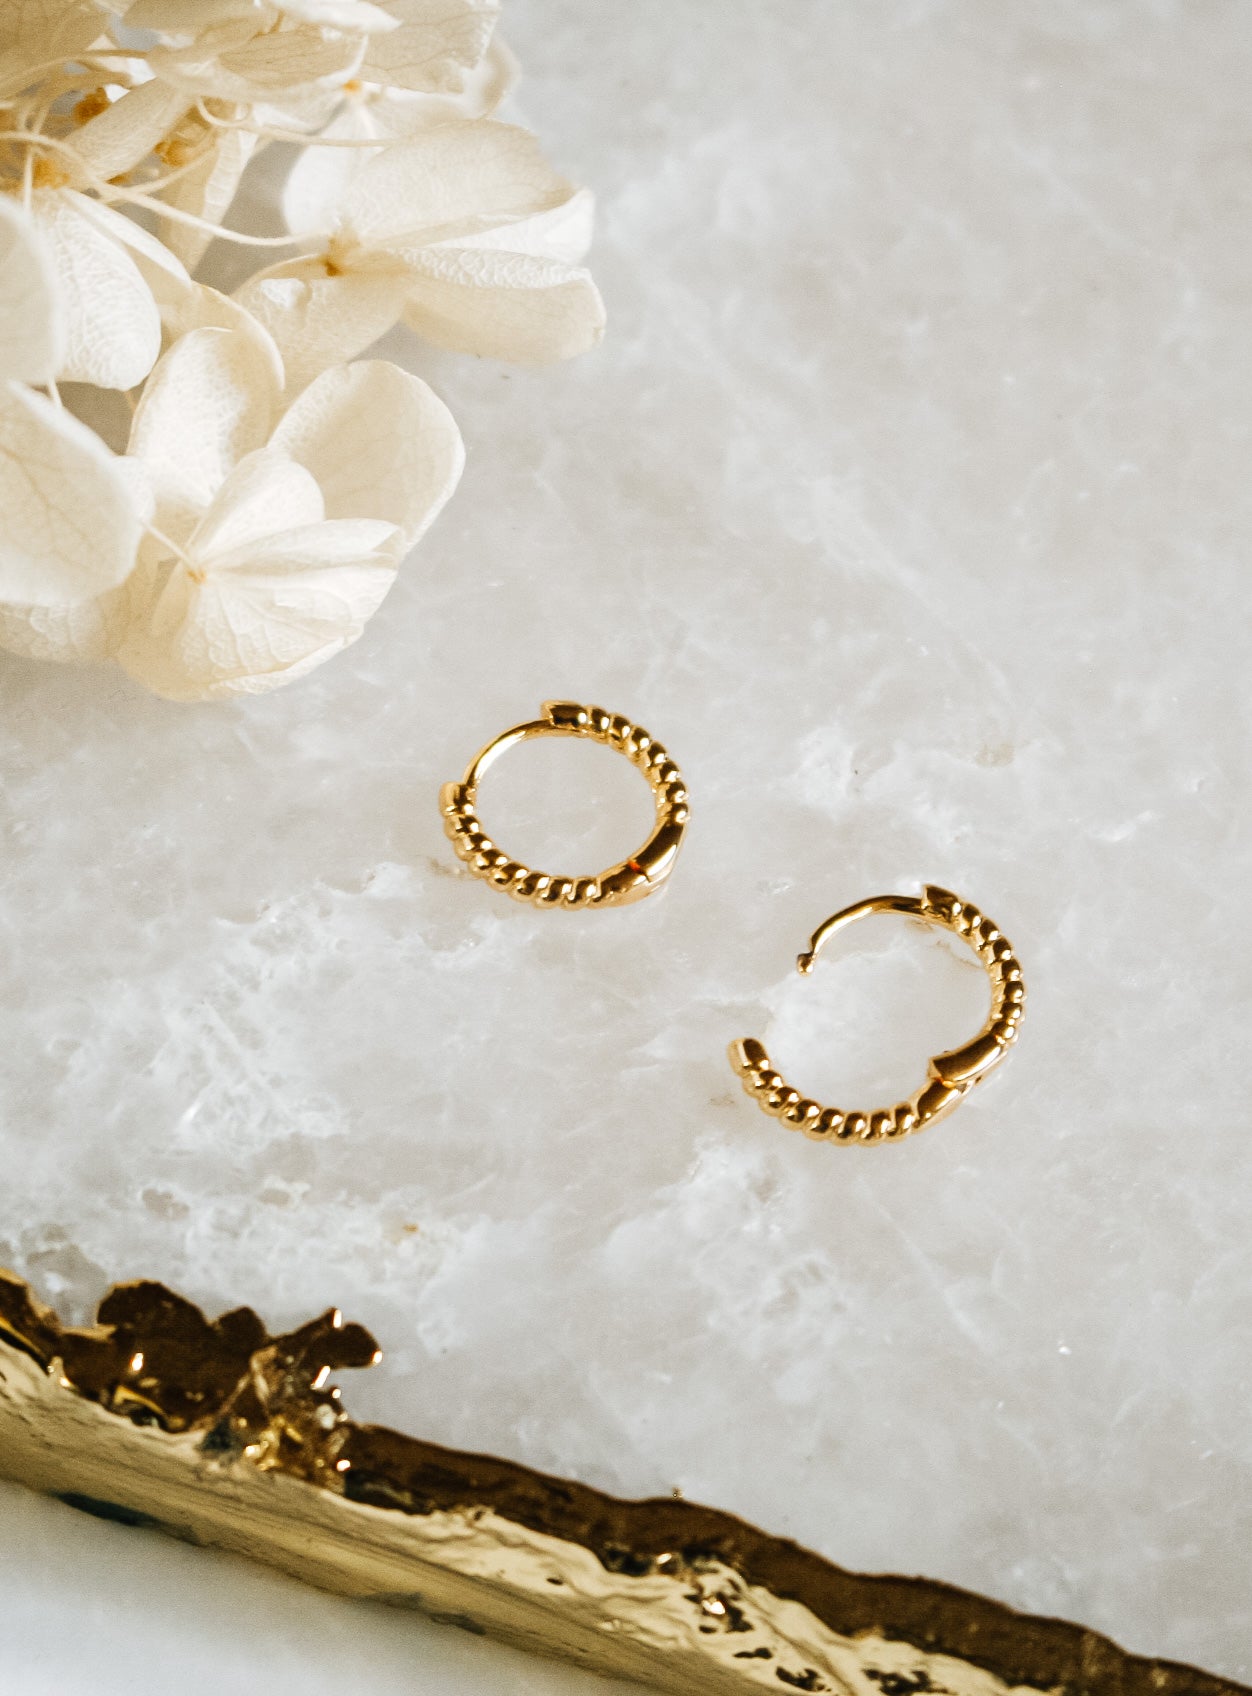 Gold Plated Twisted Hoops